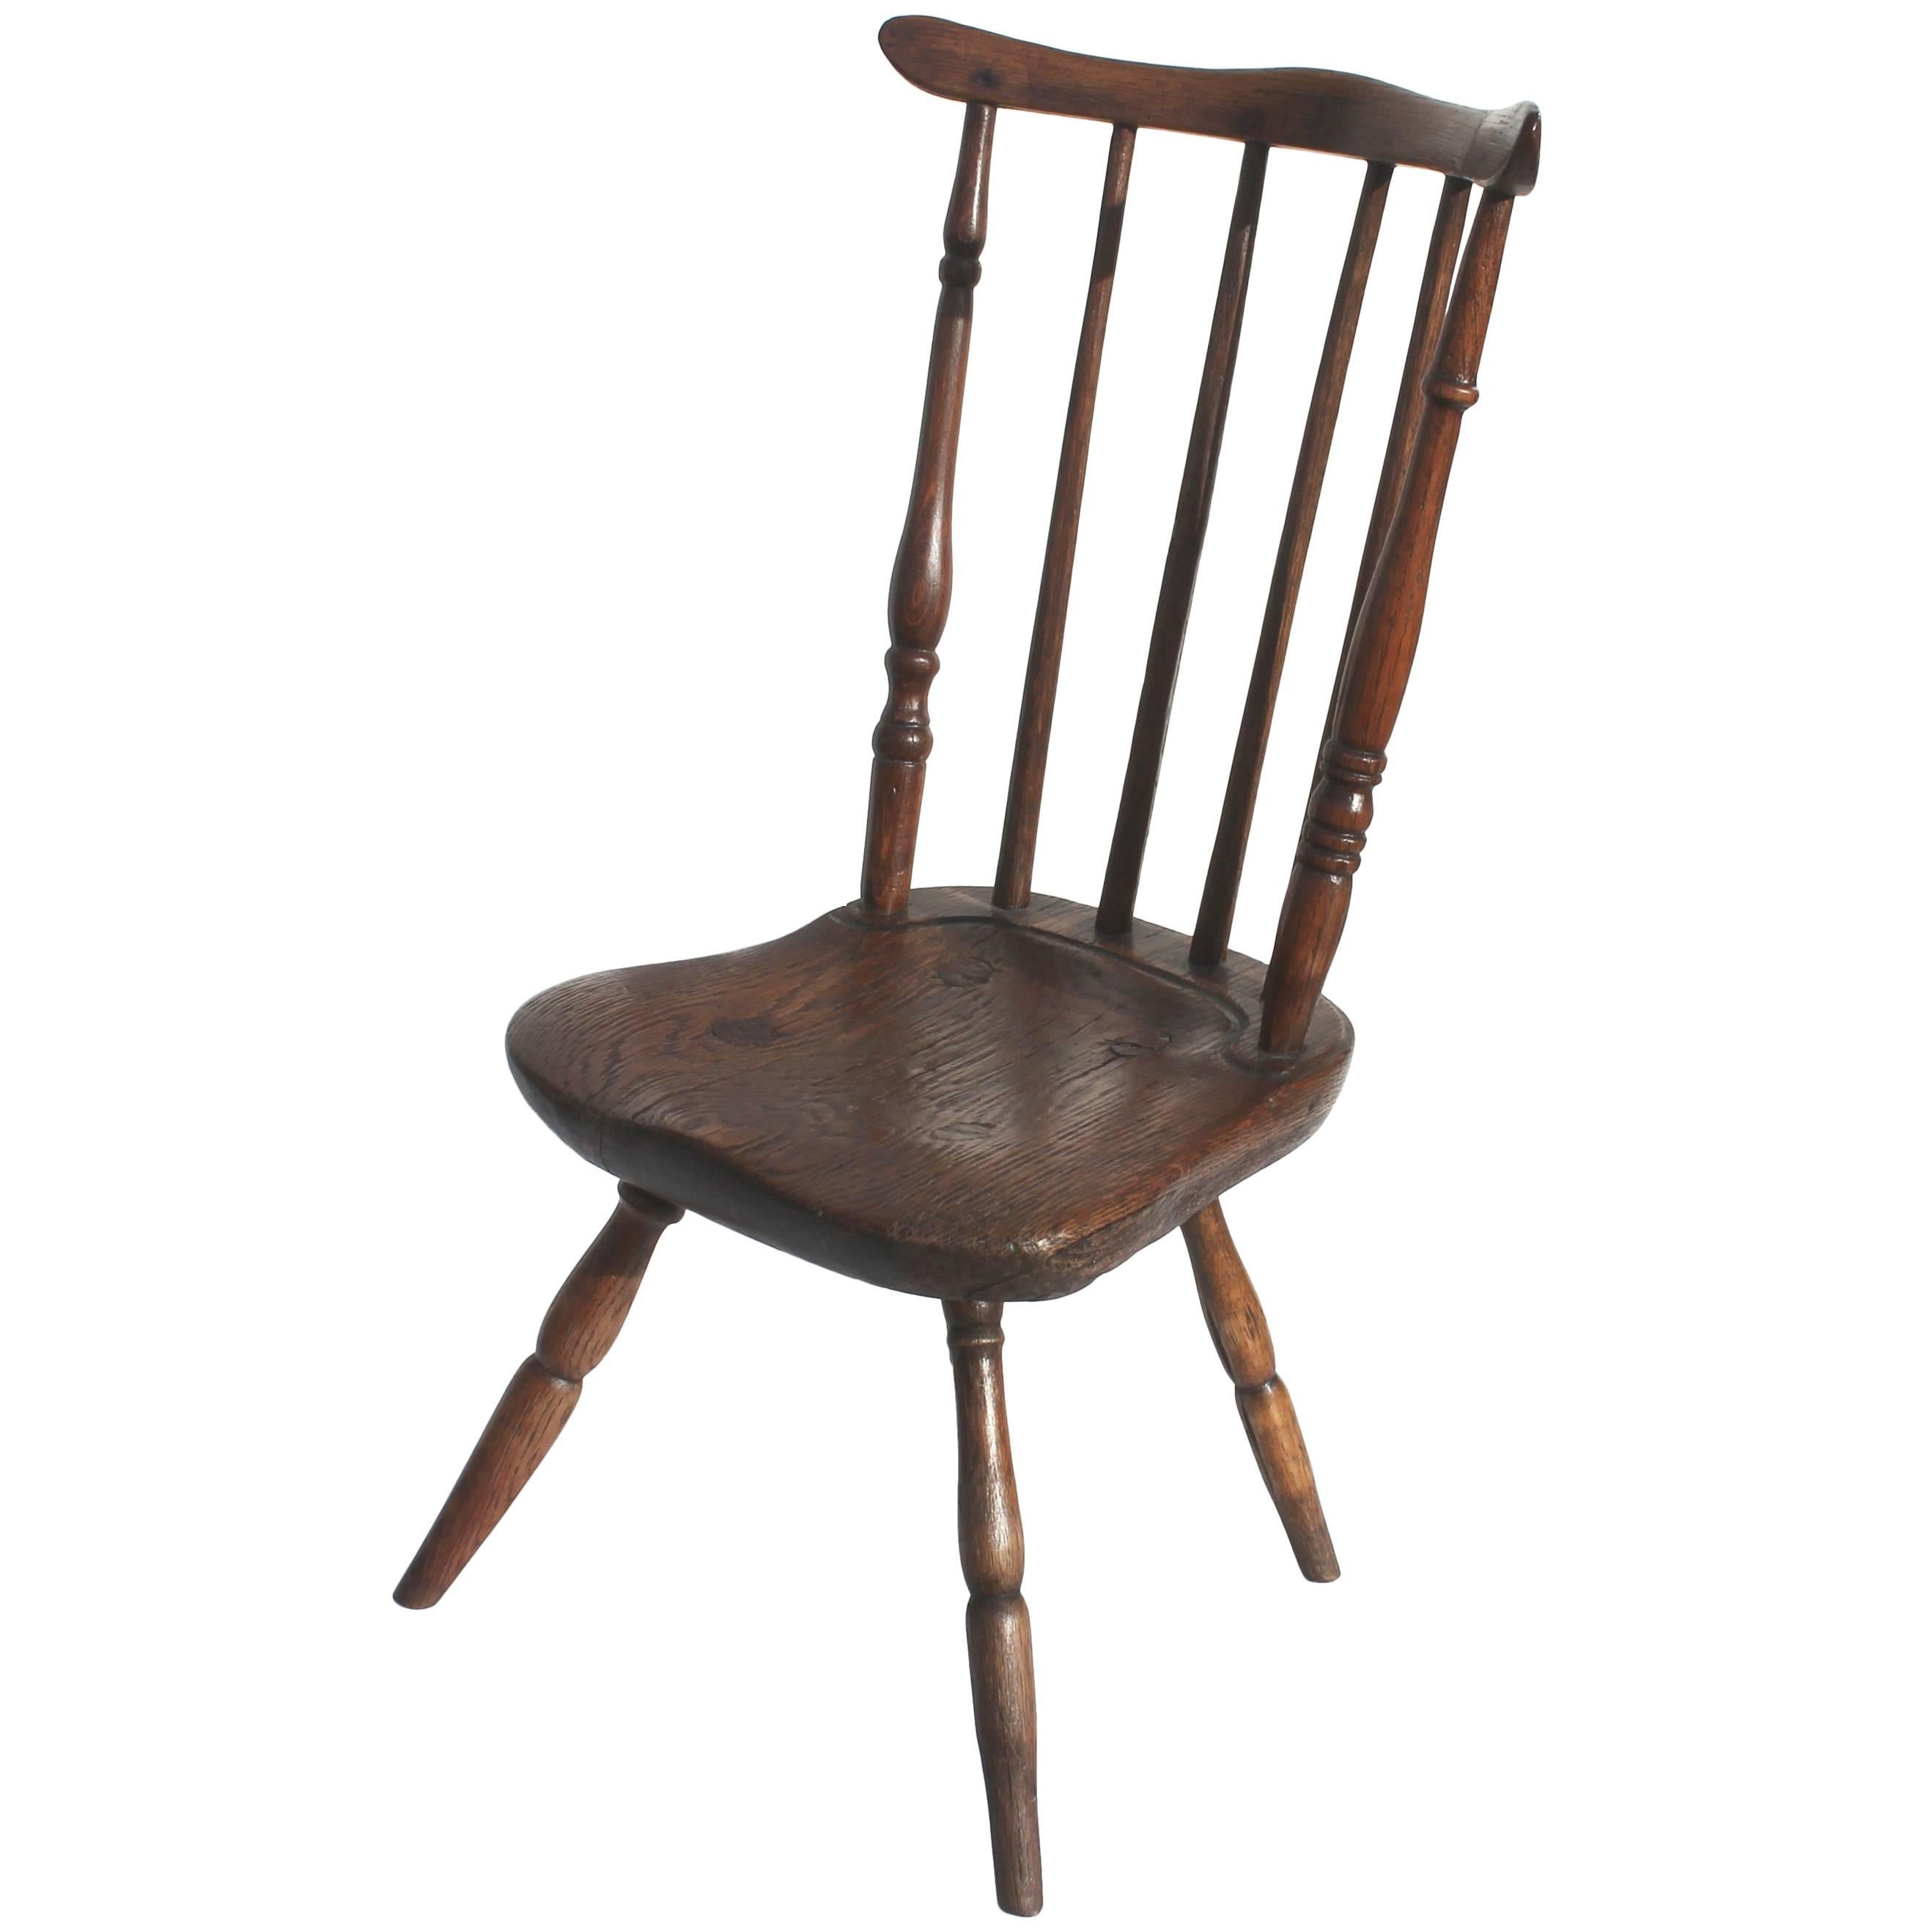 Early and Rare 19th Century Rare Child's Windsor Chair